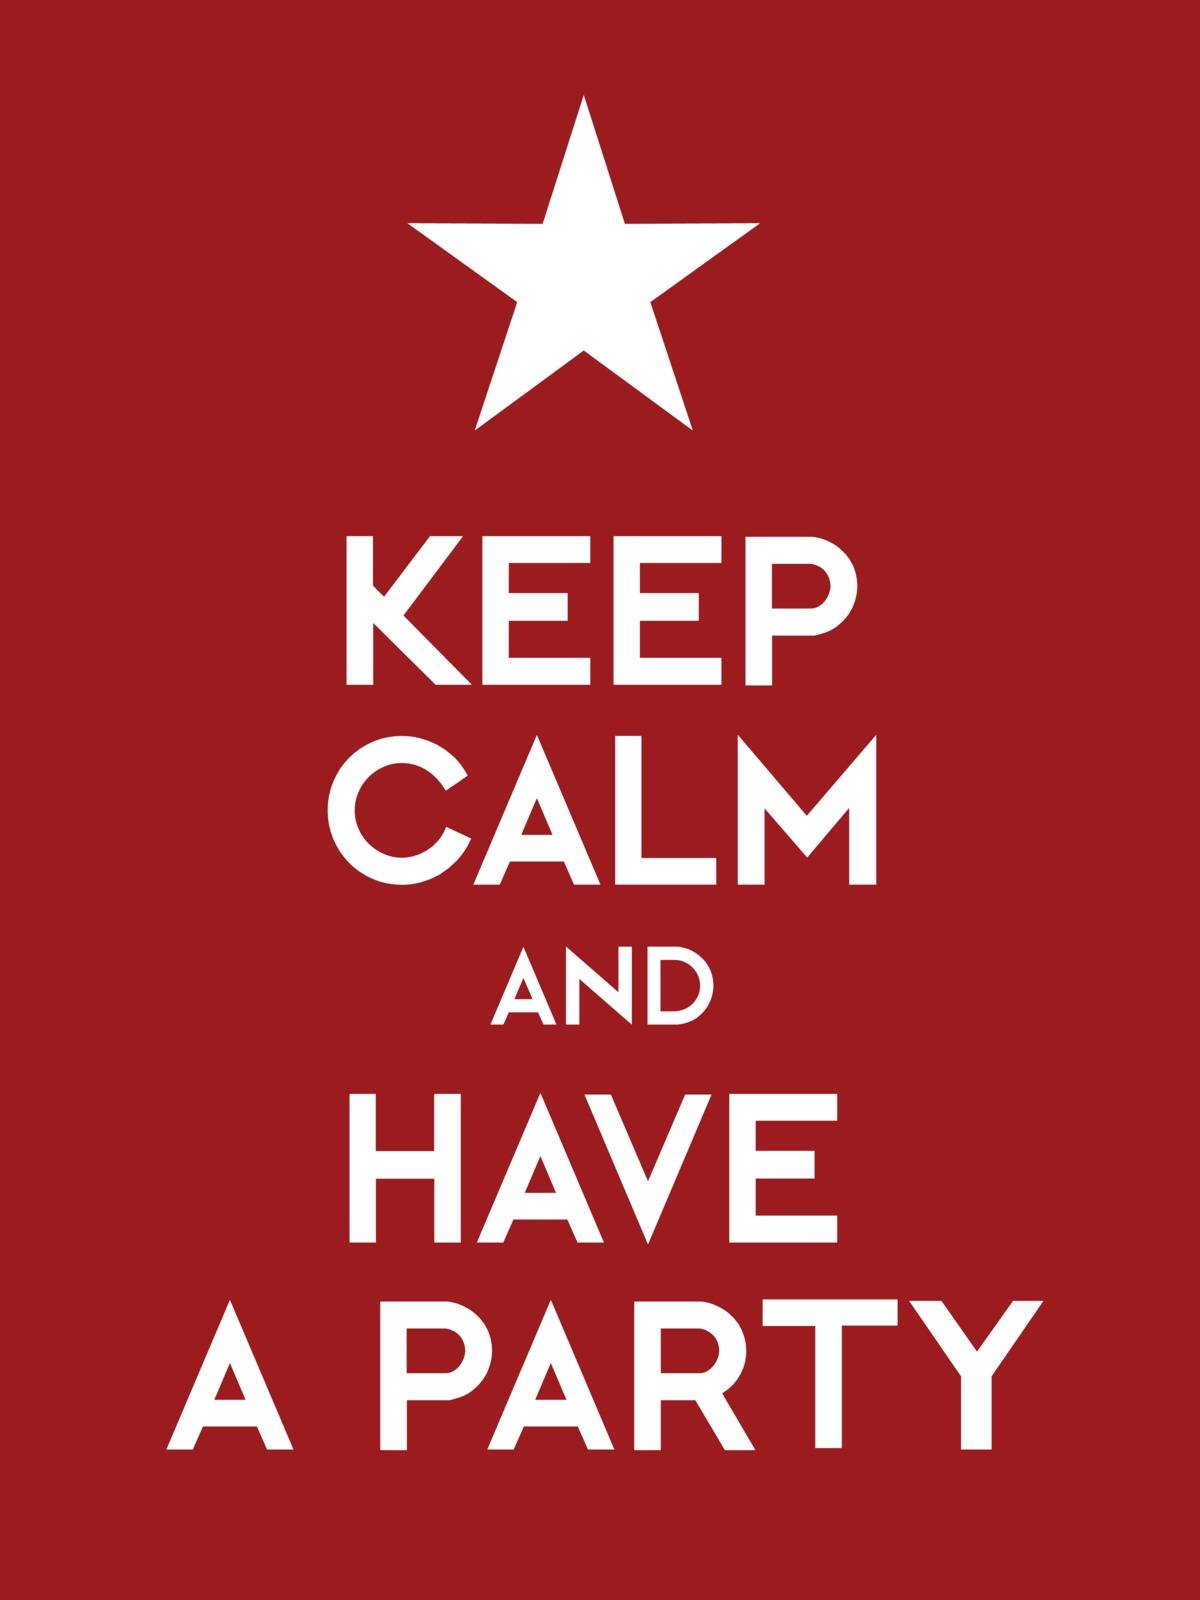 Keep calm and have a party by lkeskinen